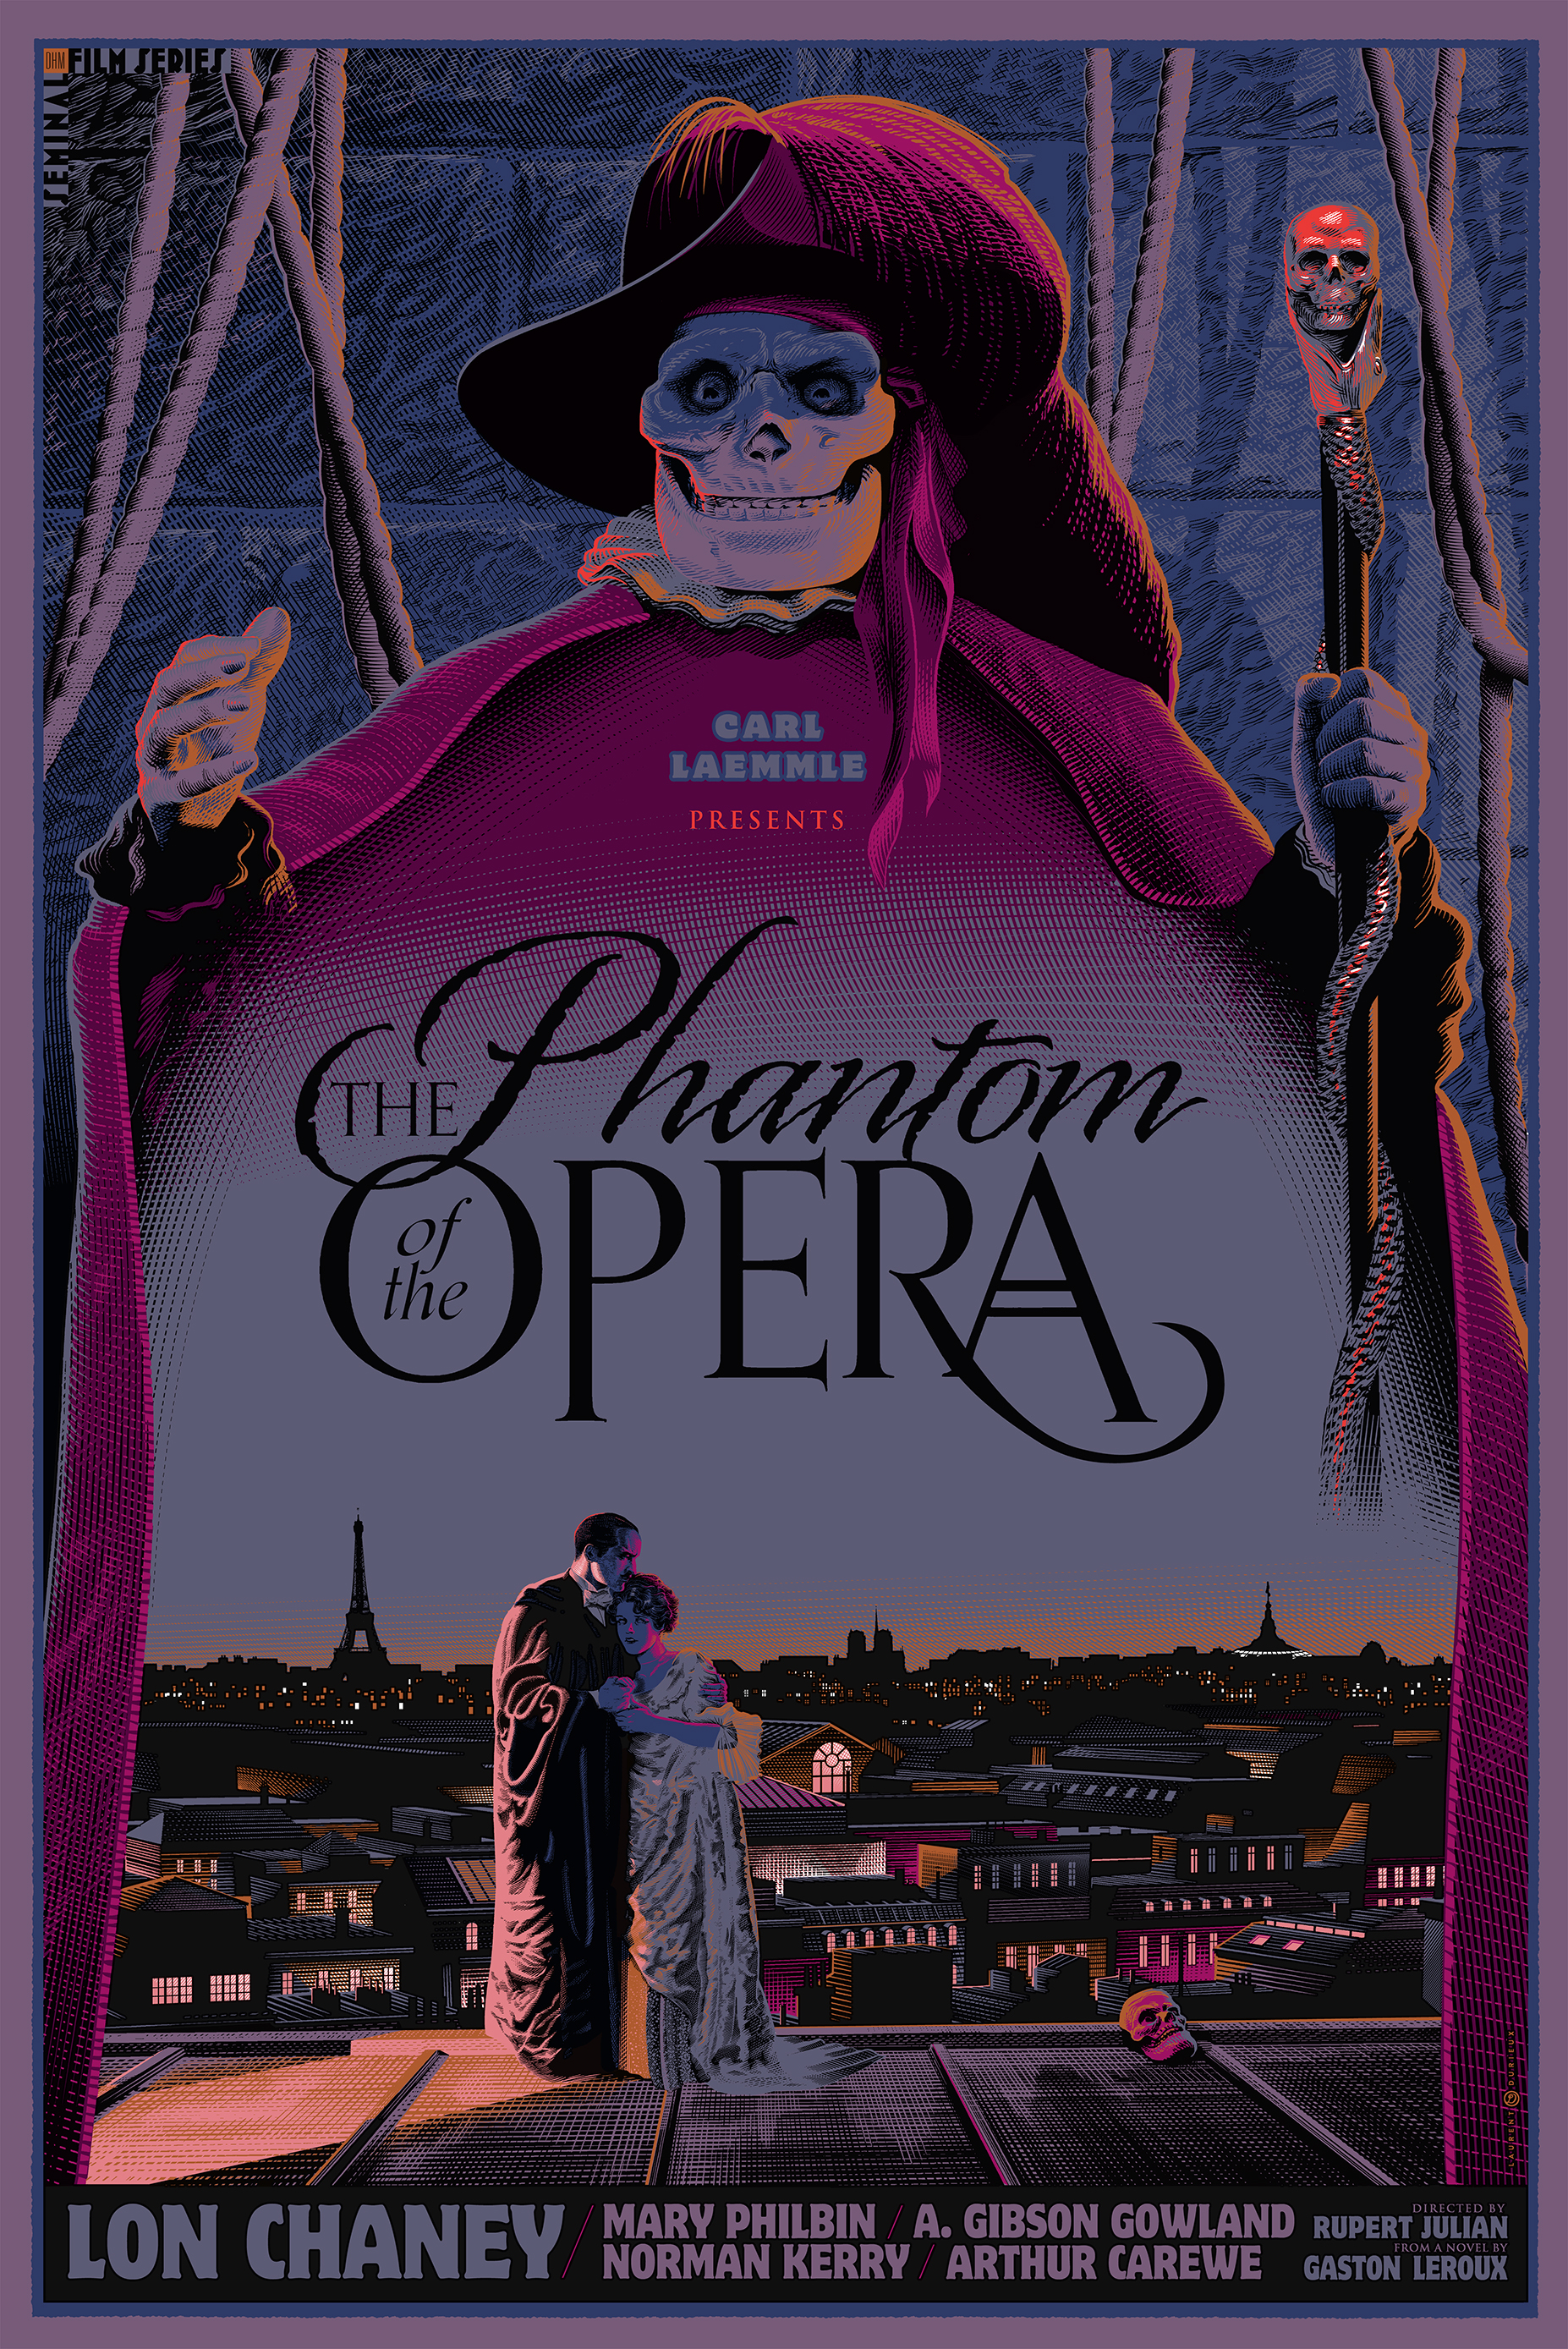 durieux-The-Phantom-of-the-Opera-variant.jpg